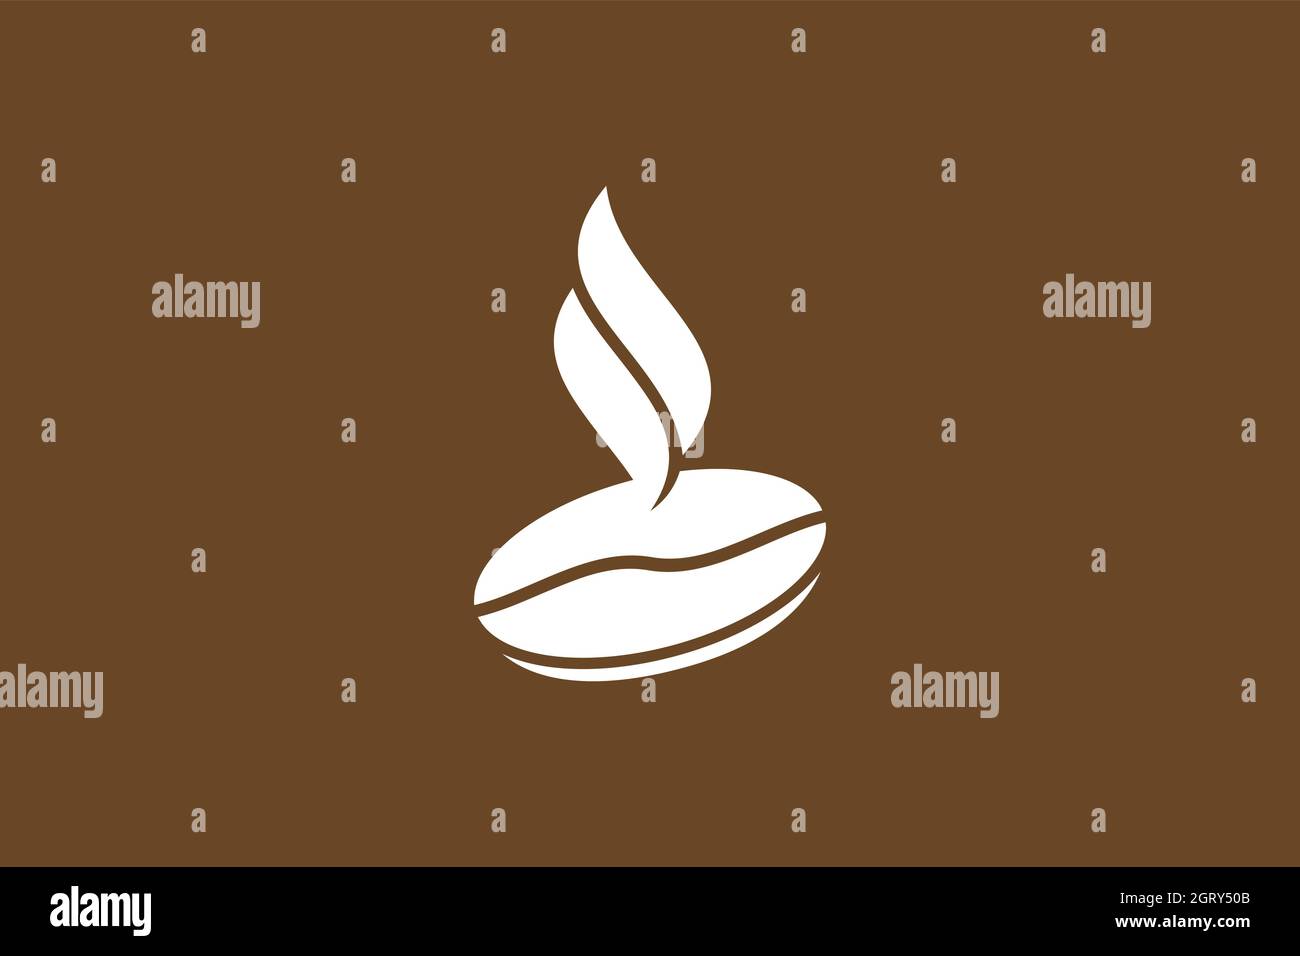 Combination of coffee beans and aroma, coffee shop or cafe logo. Creative and modern logo flat design. Vector icons. Stock Vector